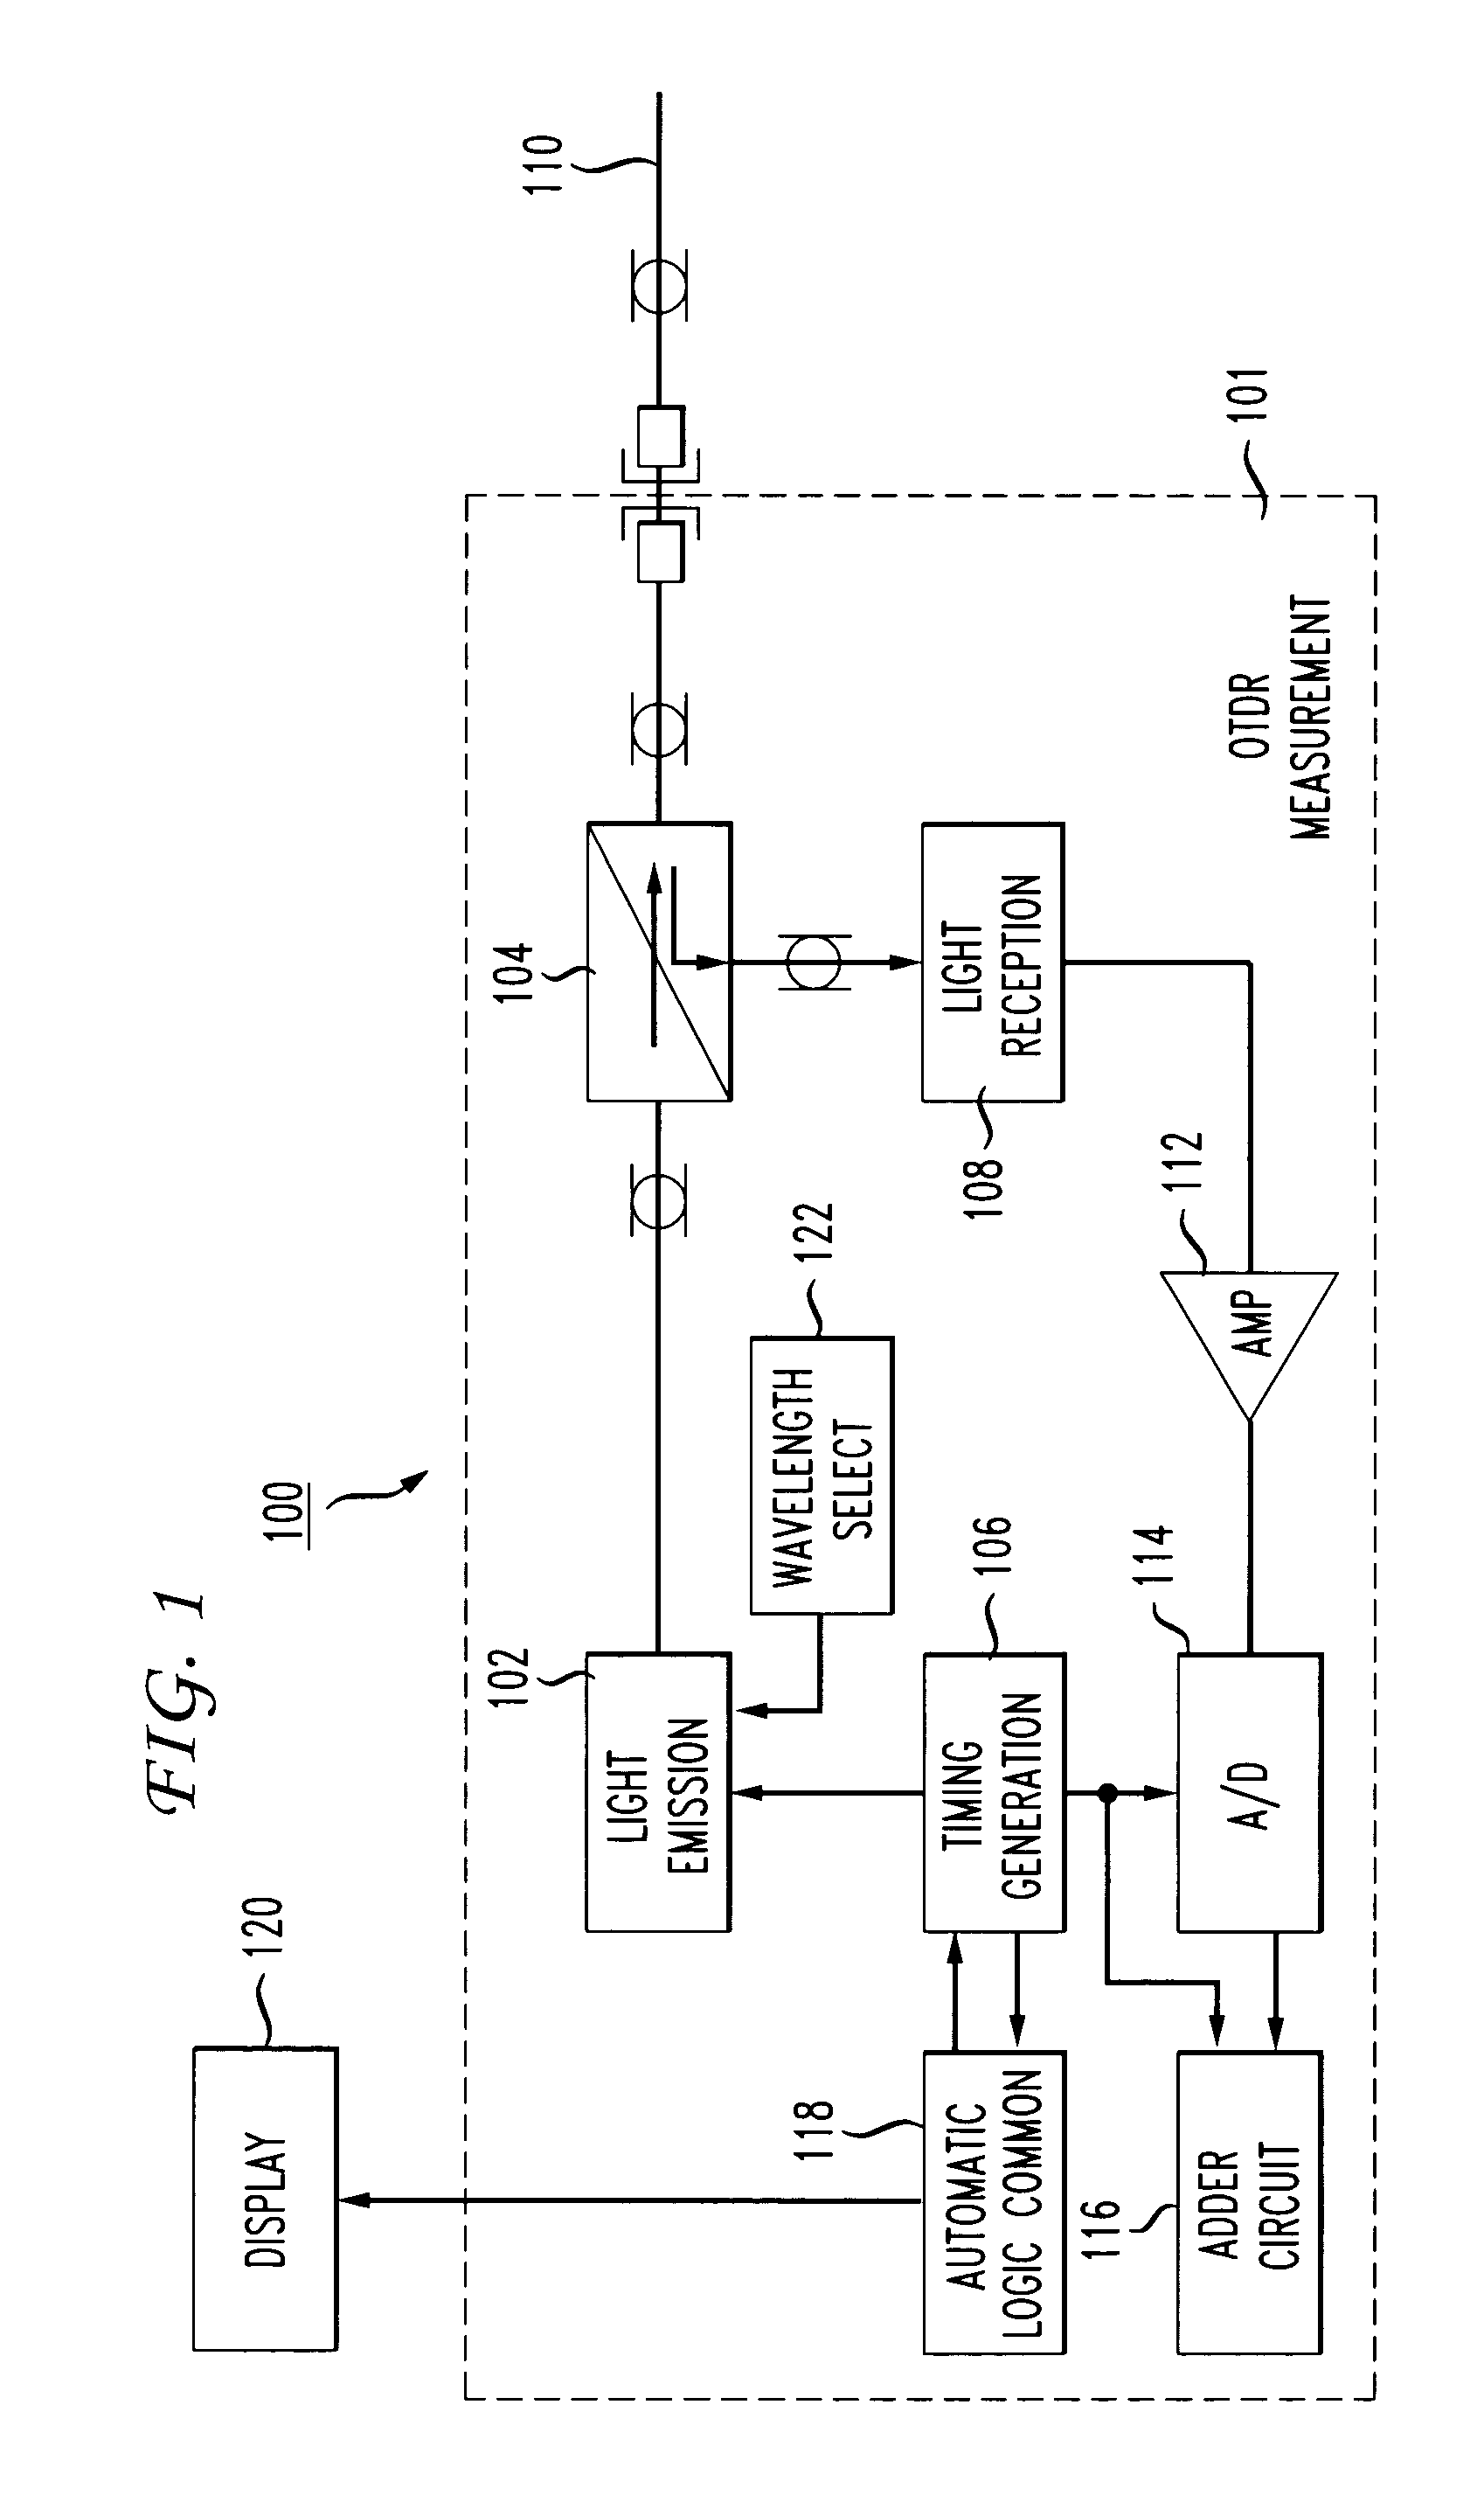 Fault location apparatus and procedures in CWDM business applications using wavelength selective OTDR